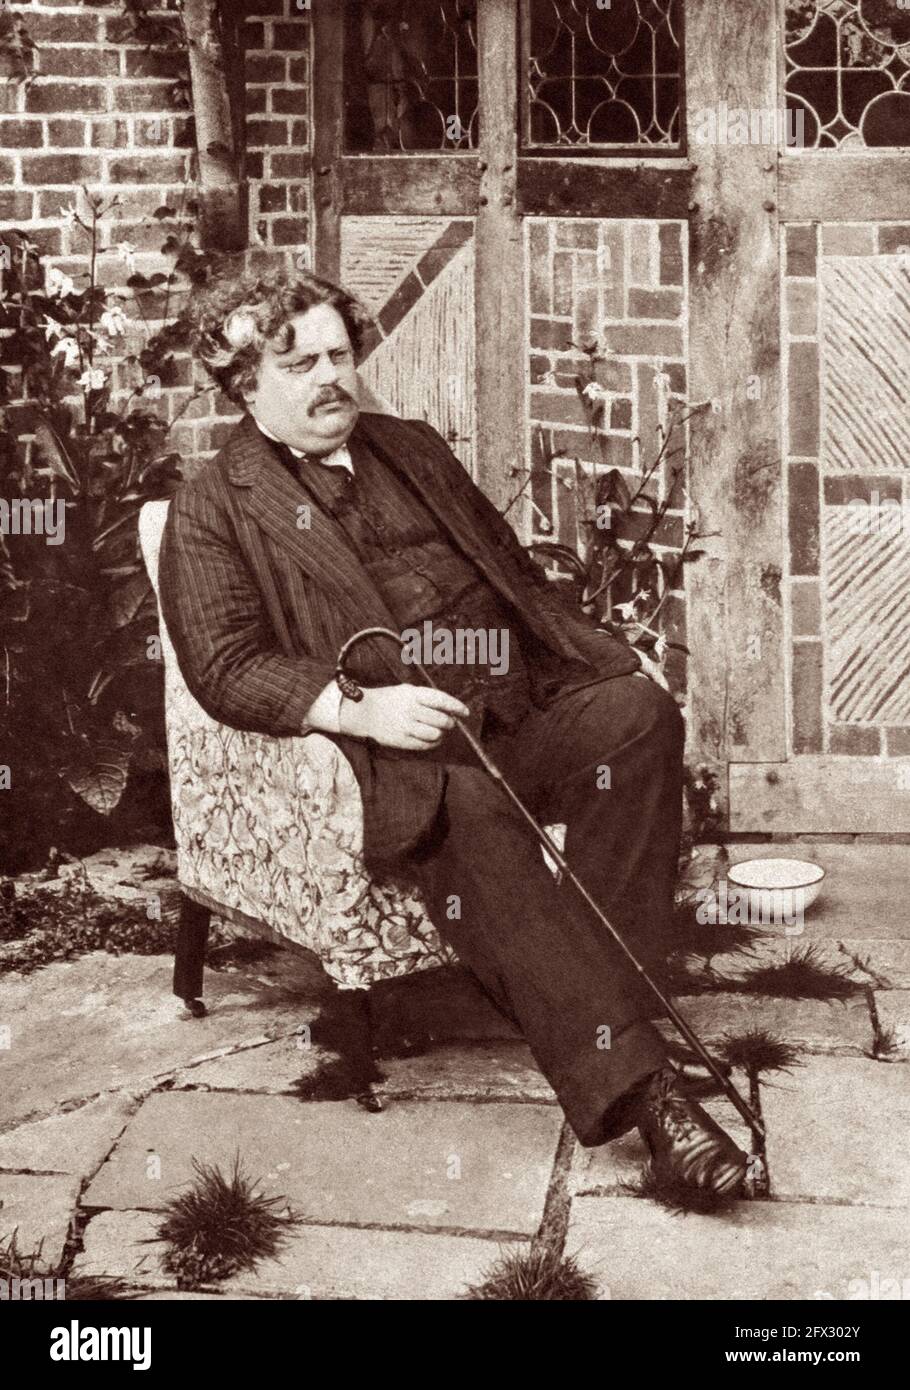 Gilbert Keith Chesterton (1874 - 1936), known as G.K. Chesterton, shown c1914, was a leading British author, thinker, journalist, arts critic, debater, lay theologian and Christian apologist of the early 20th Century. A prolific writer, he published nearly 100 books and over 4,000 newspaper columns and essays. Stock Photo